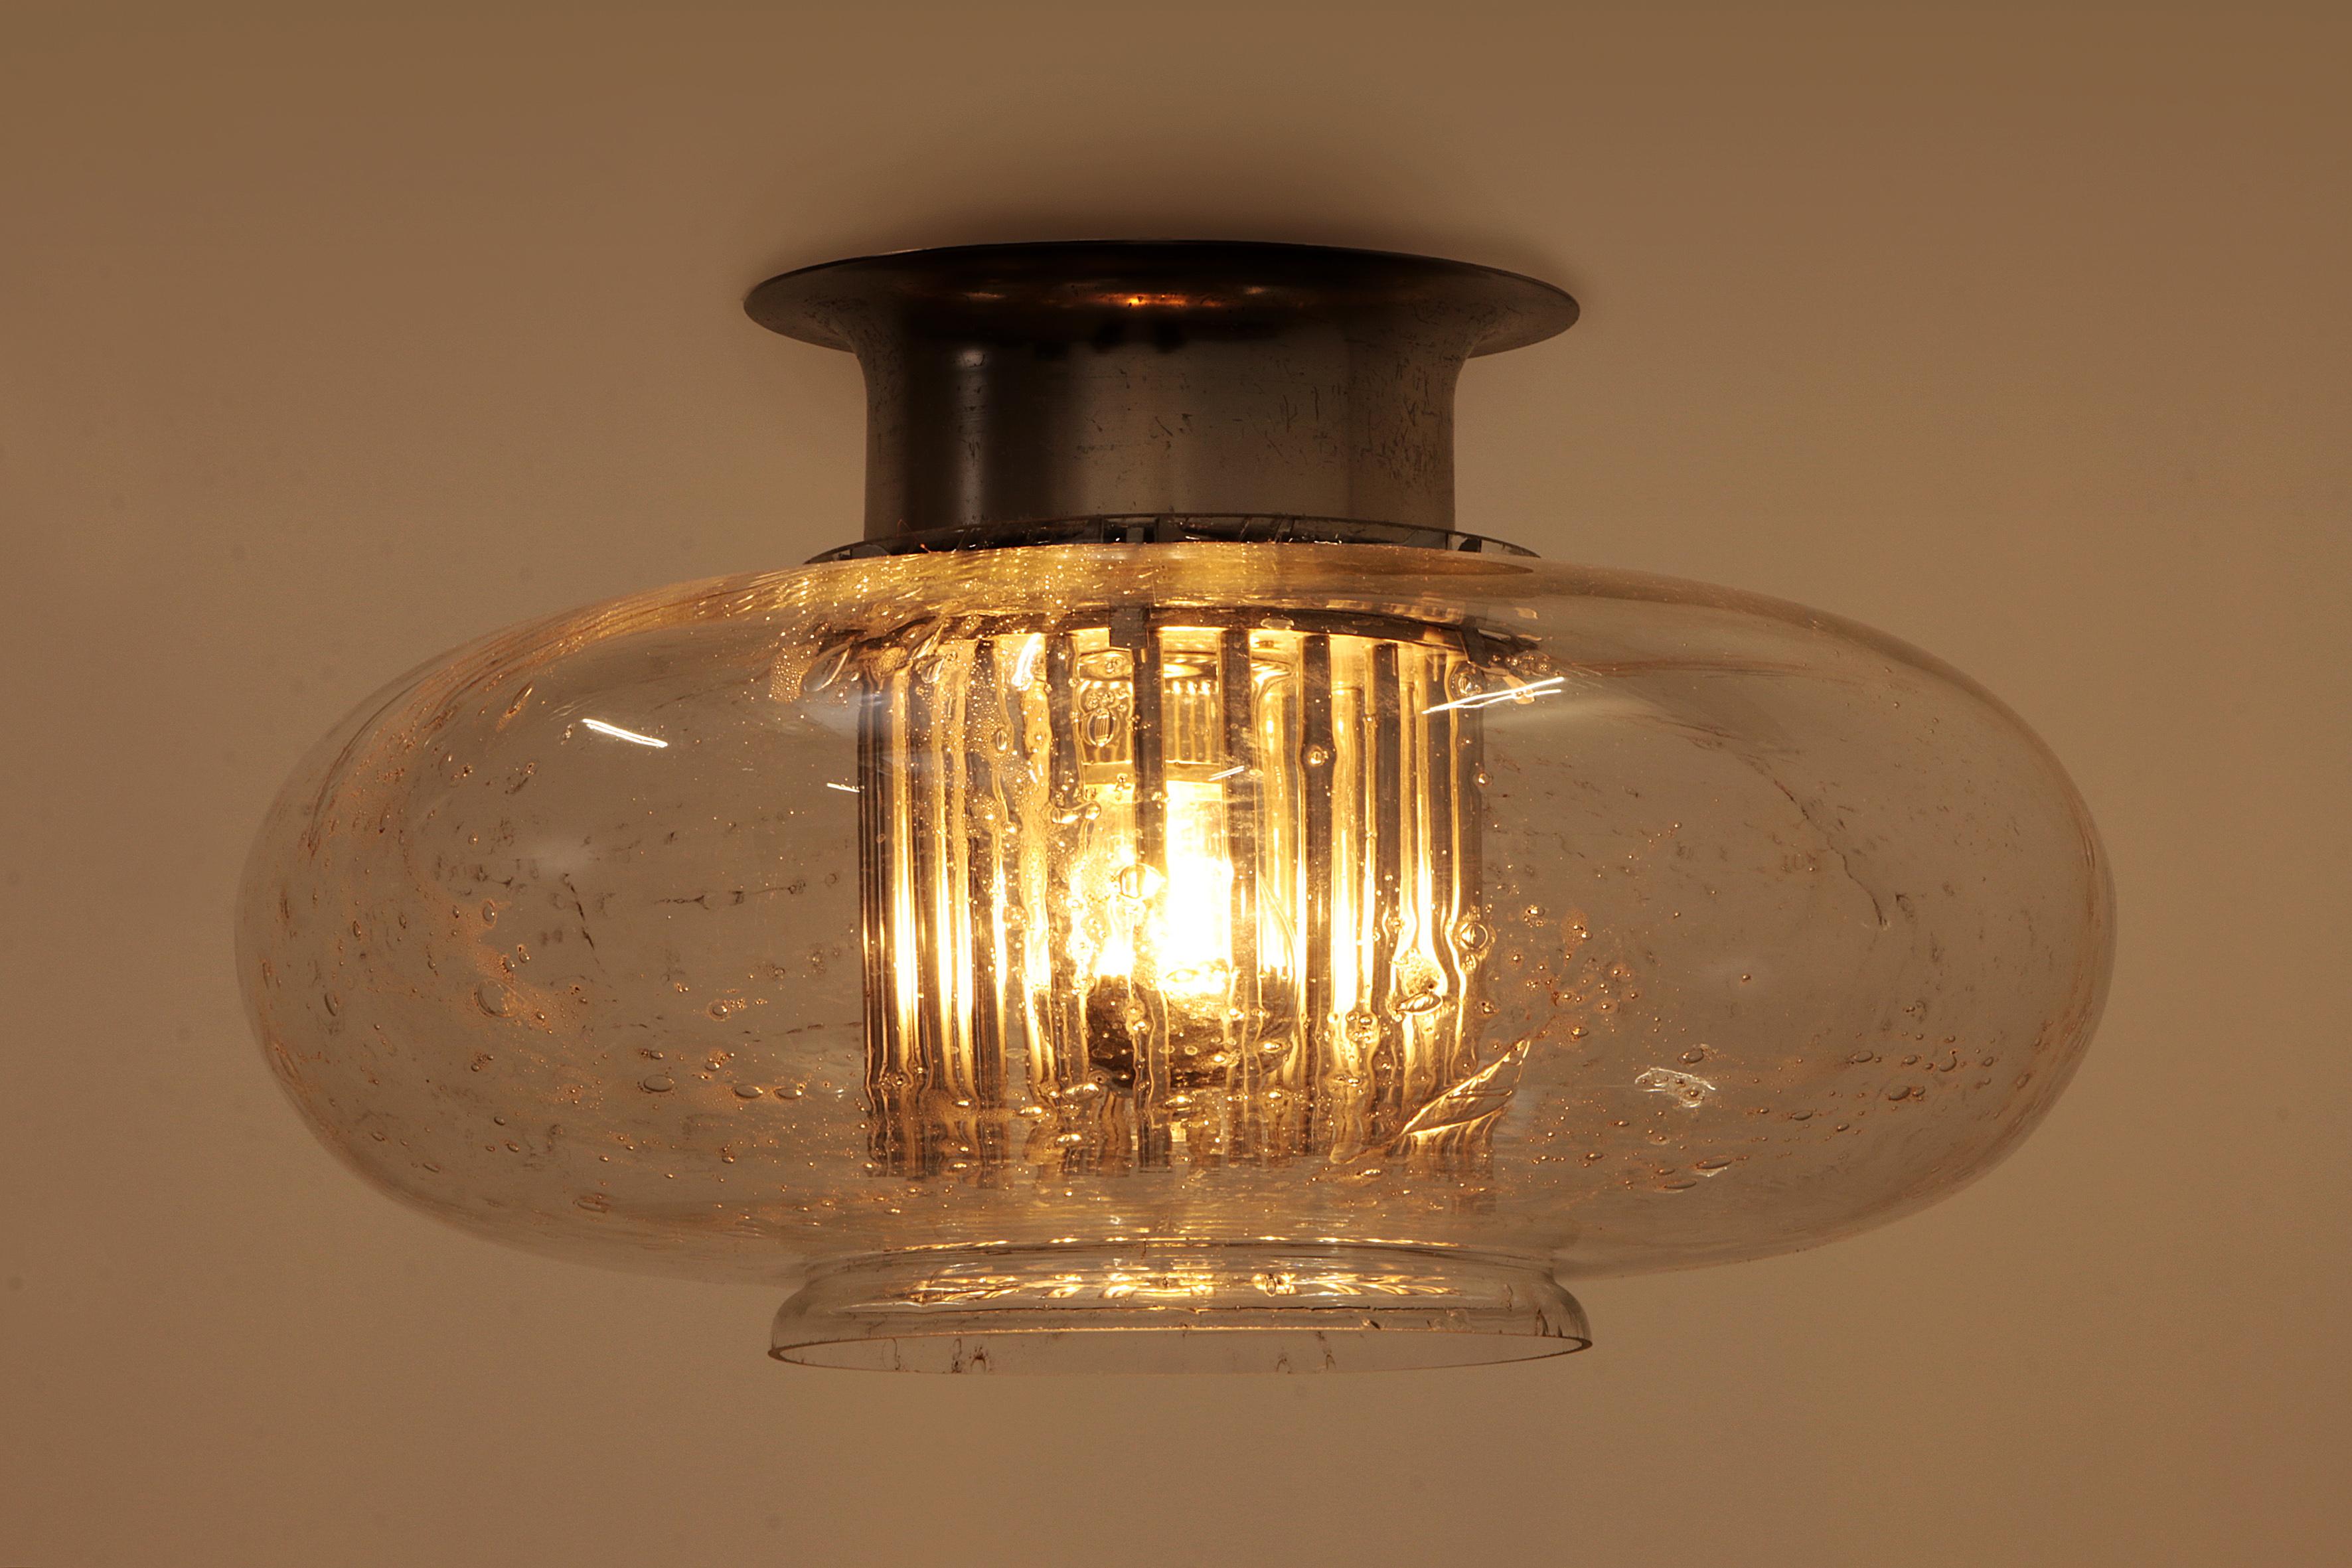 Mid-20th Century Beautiful Doria Leuchten Ceiling Lamp with Chrome Accents, 1960 Germany